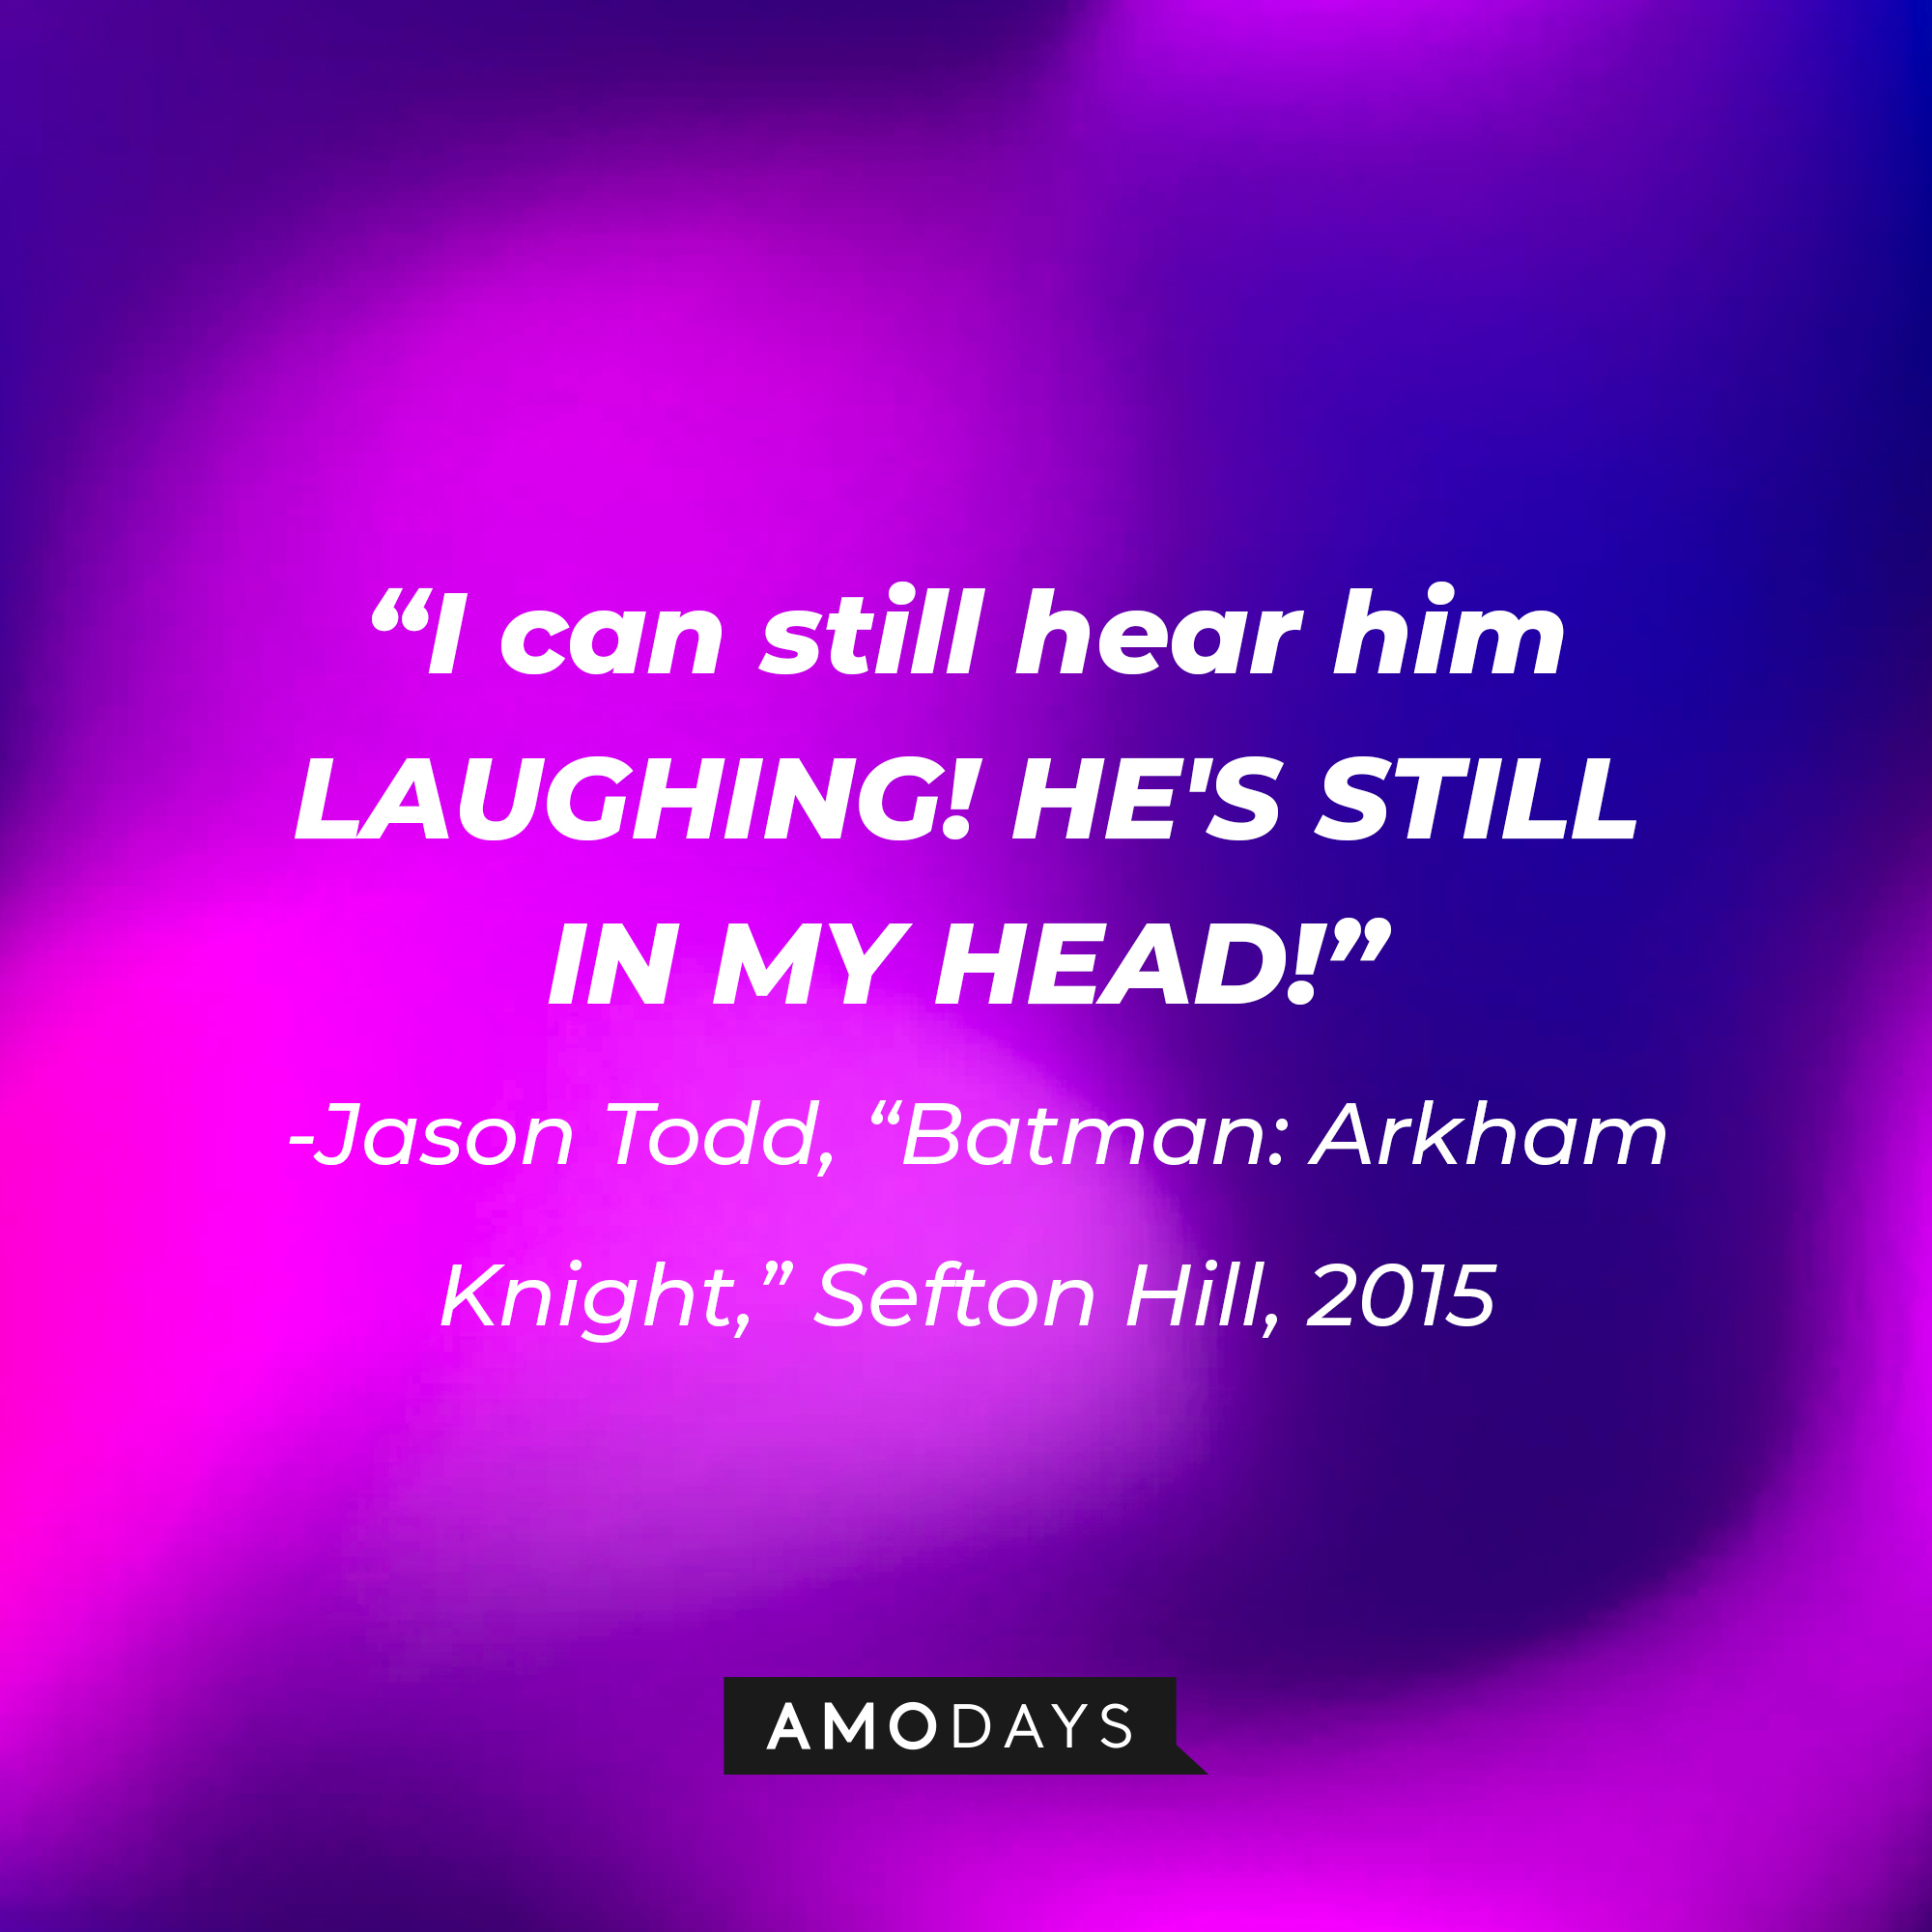 A quote from Jason Todd in "Batman: Arkham Knight," Sefton Hill, 2015: "I can still hear him LAUGHING! HE'S STILL IN MY HEAD!" | Source: AmoDays